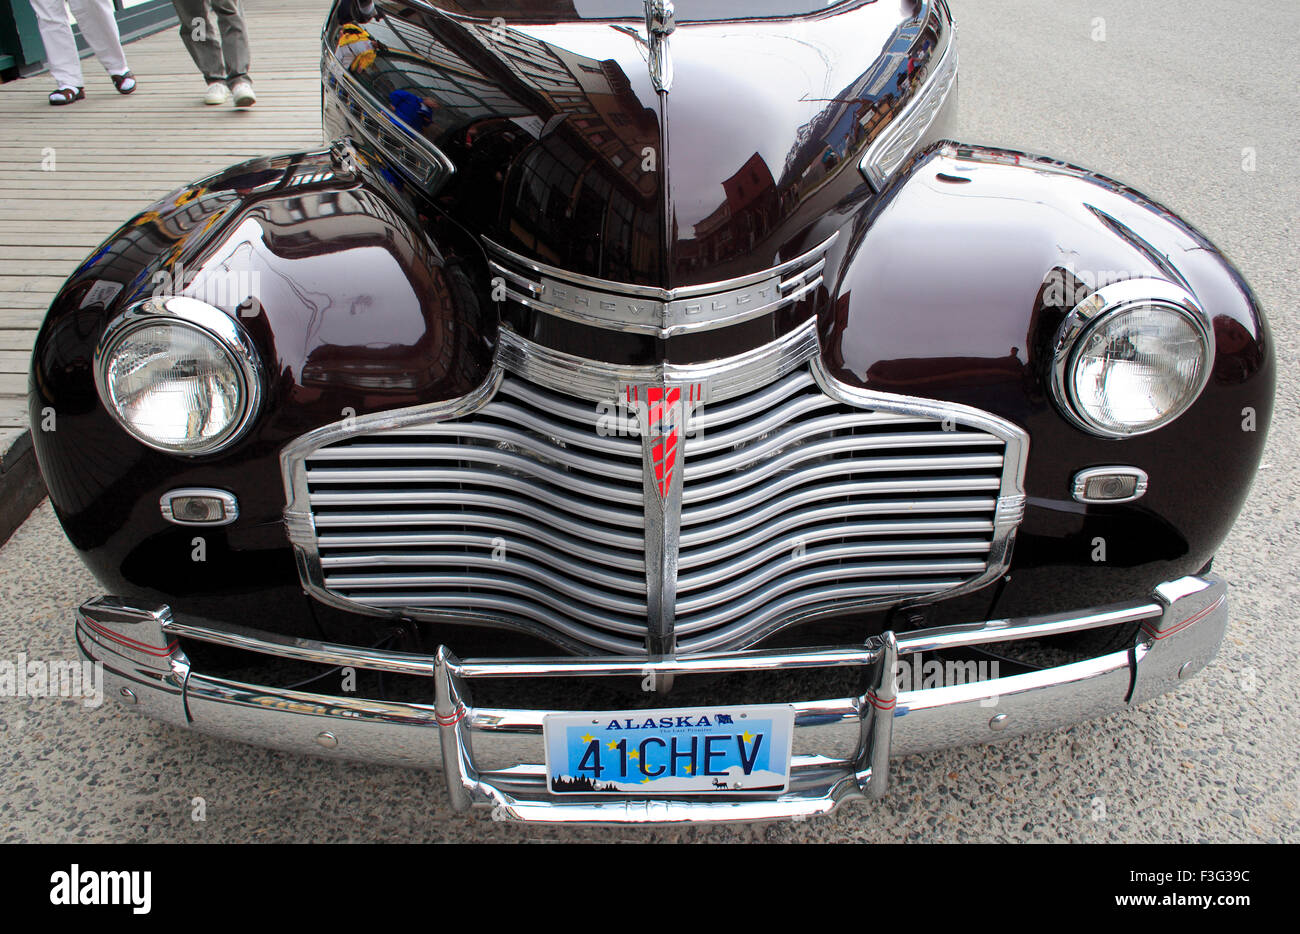 License number plate of Chevrolet car in downtown street ; Skagway ; Alaska ; U.S.A. United States of America Stock Photo